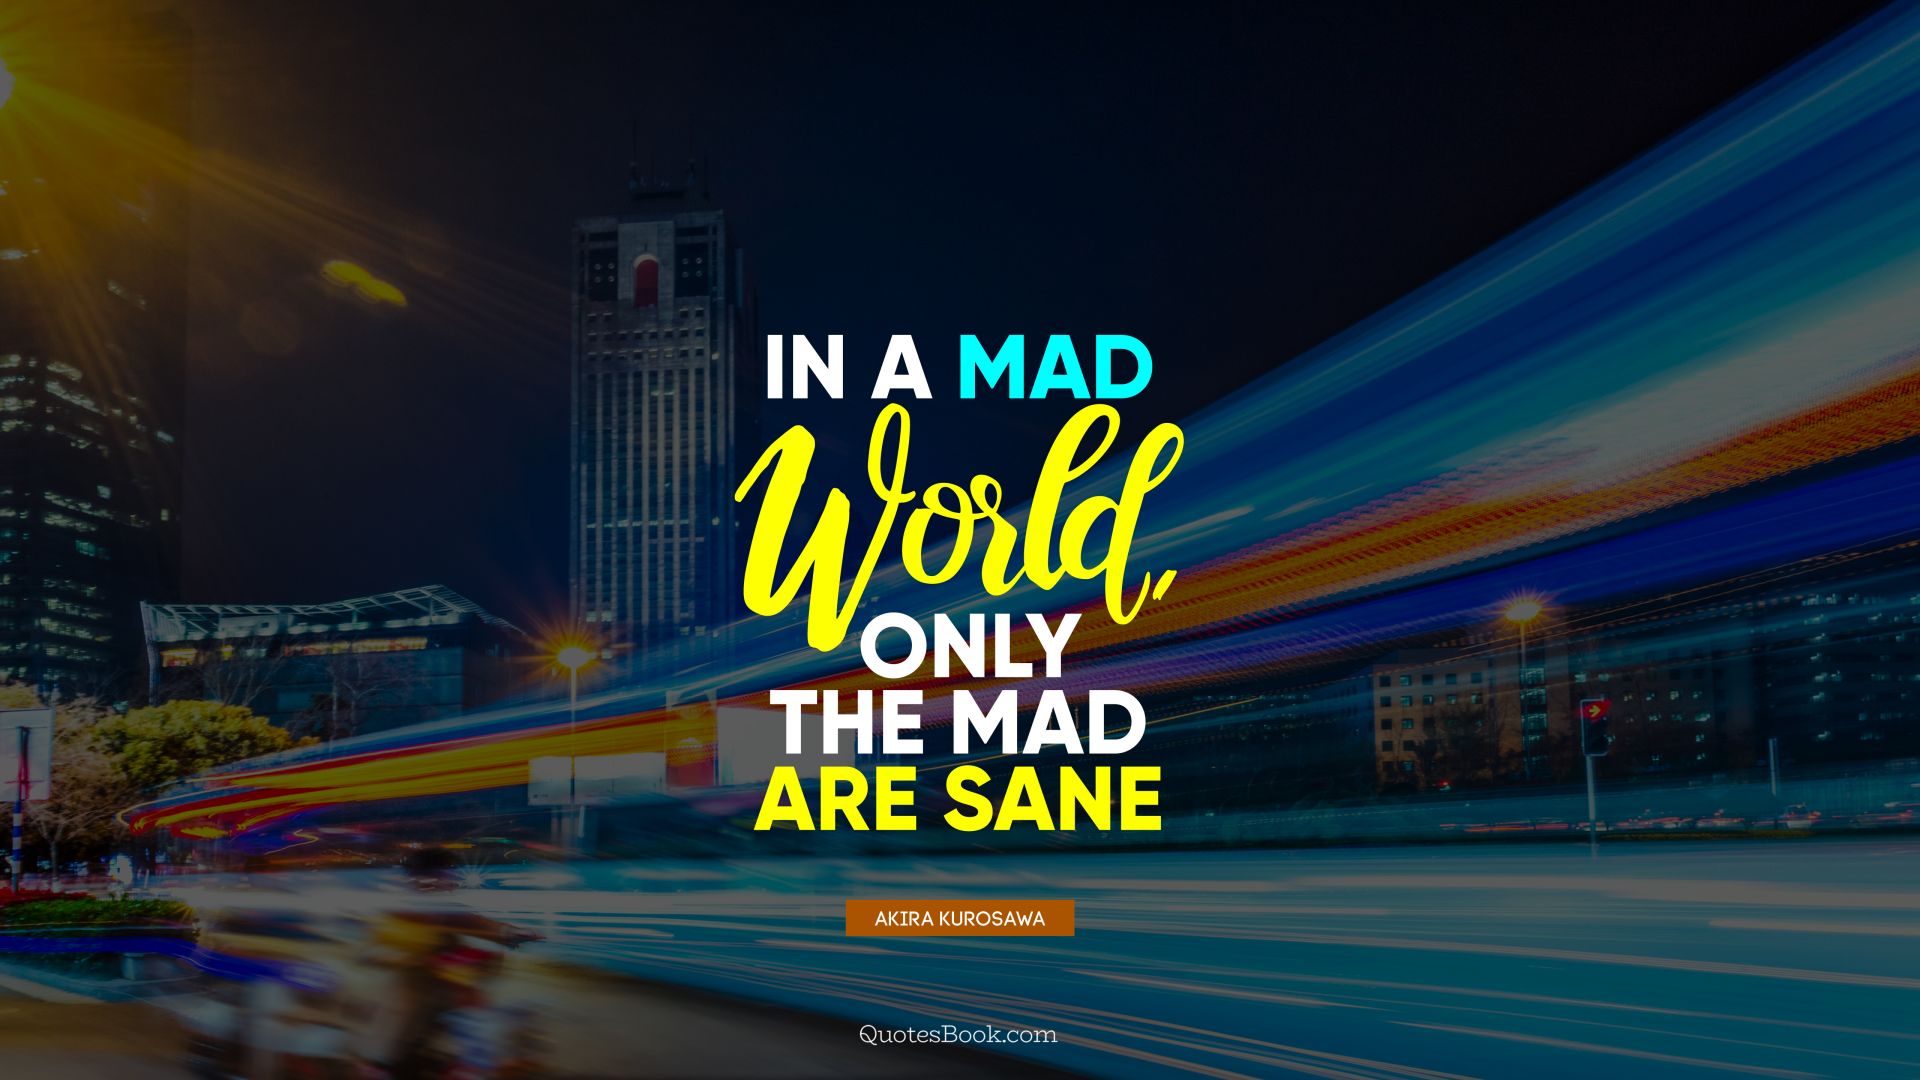 In a mad world, only the mad are sane. - Quote by Akira Kurosawa